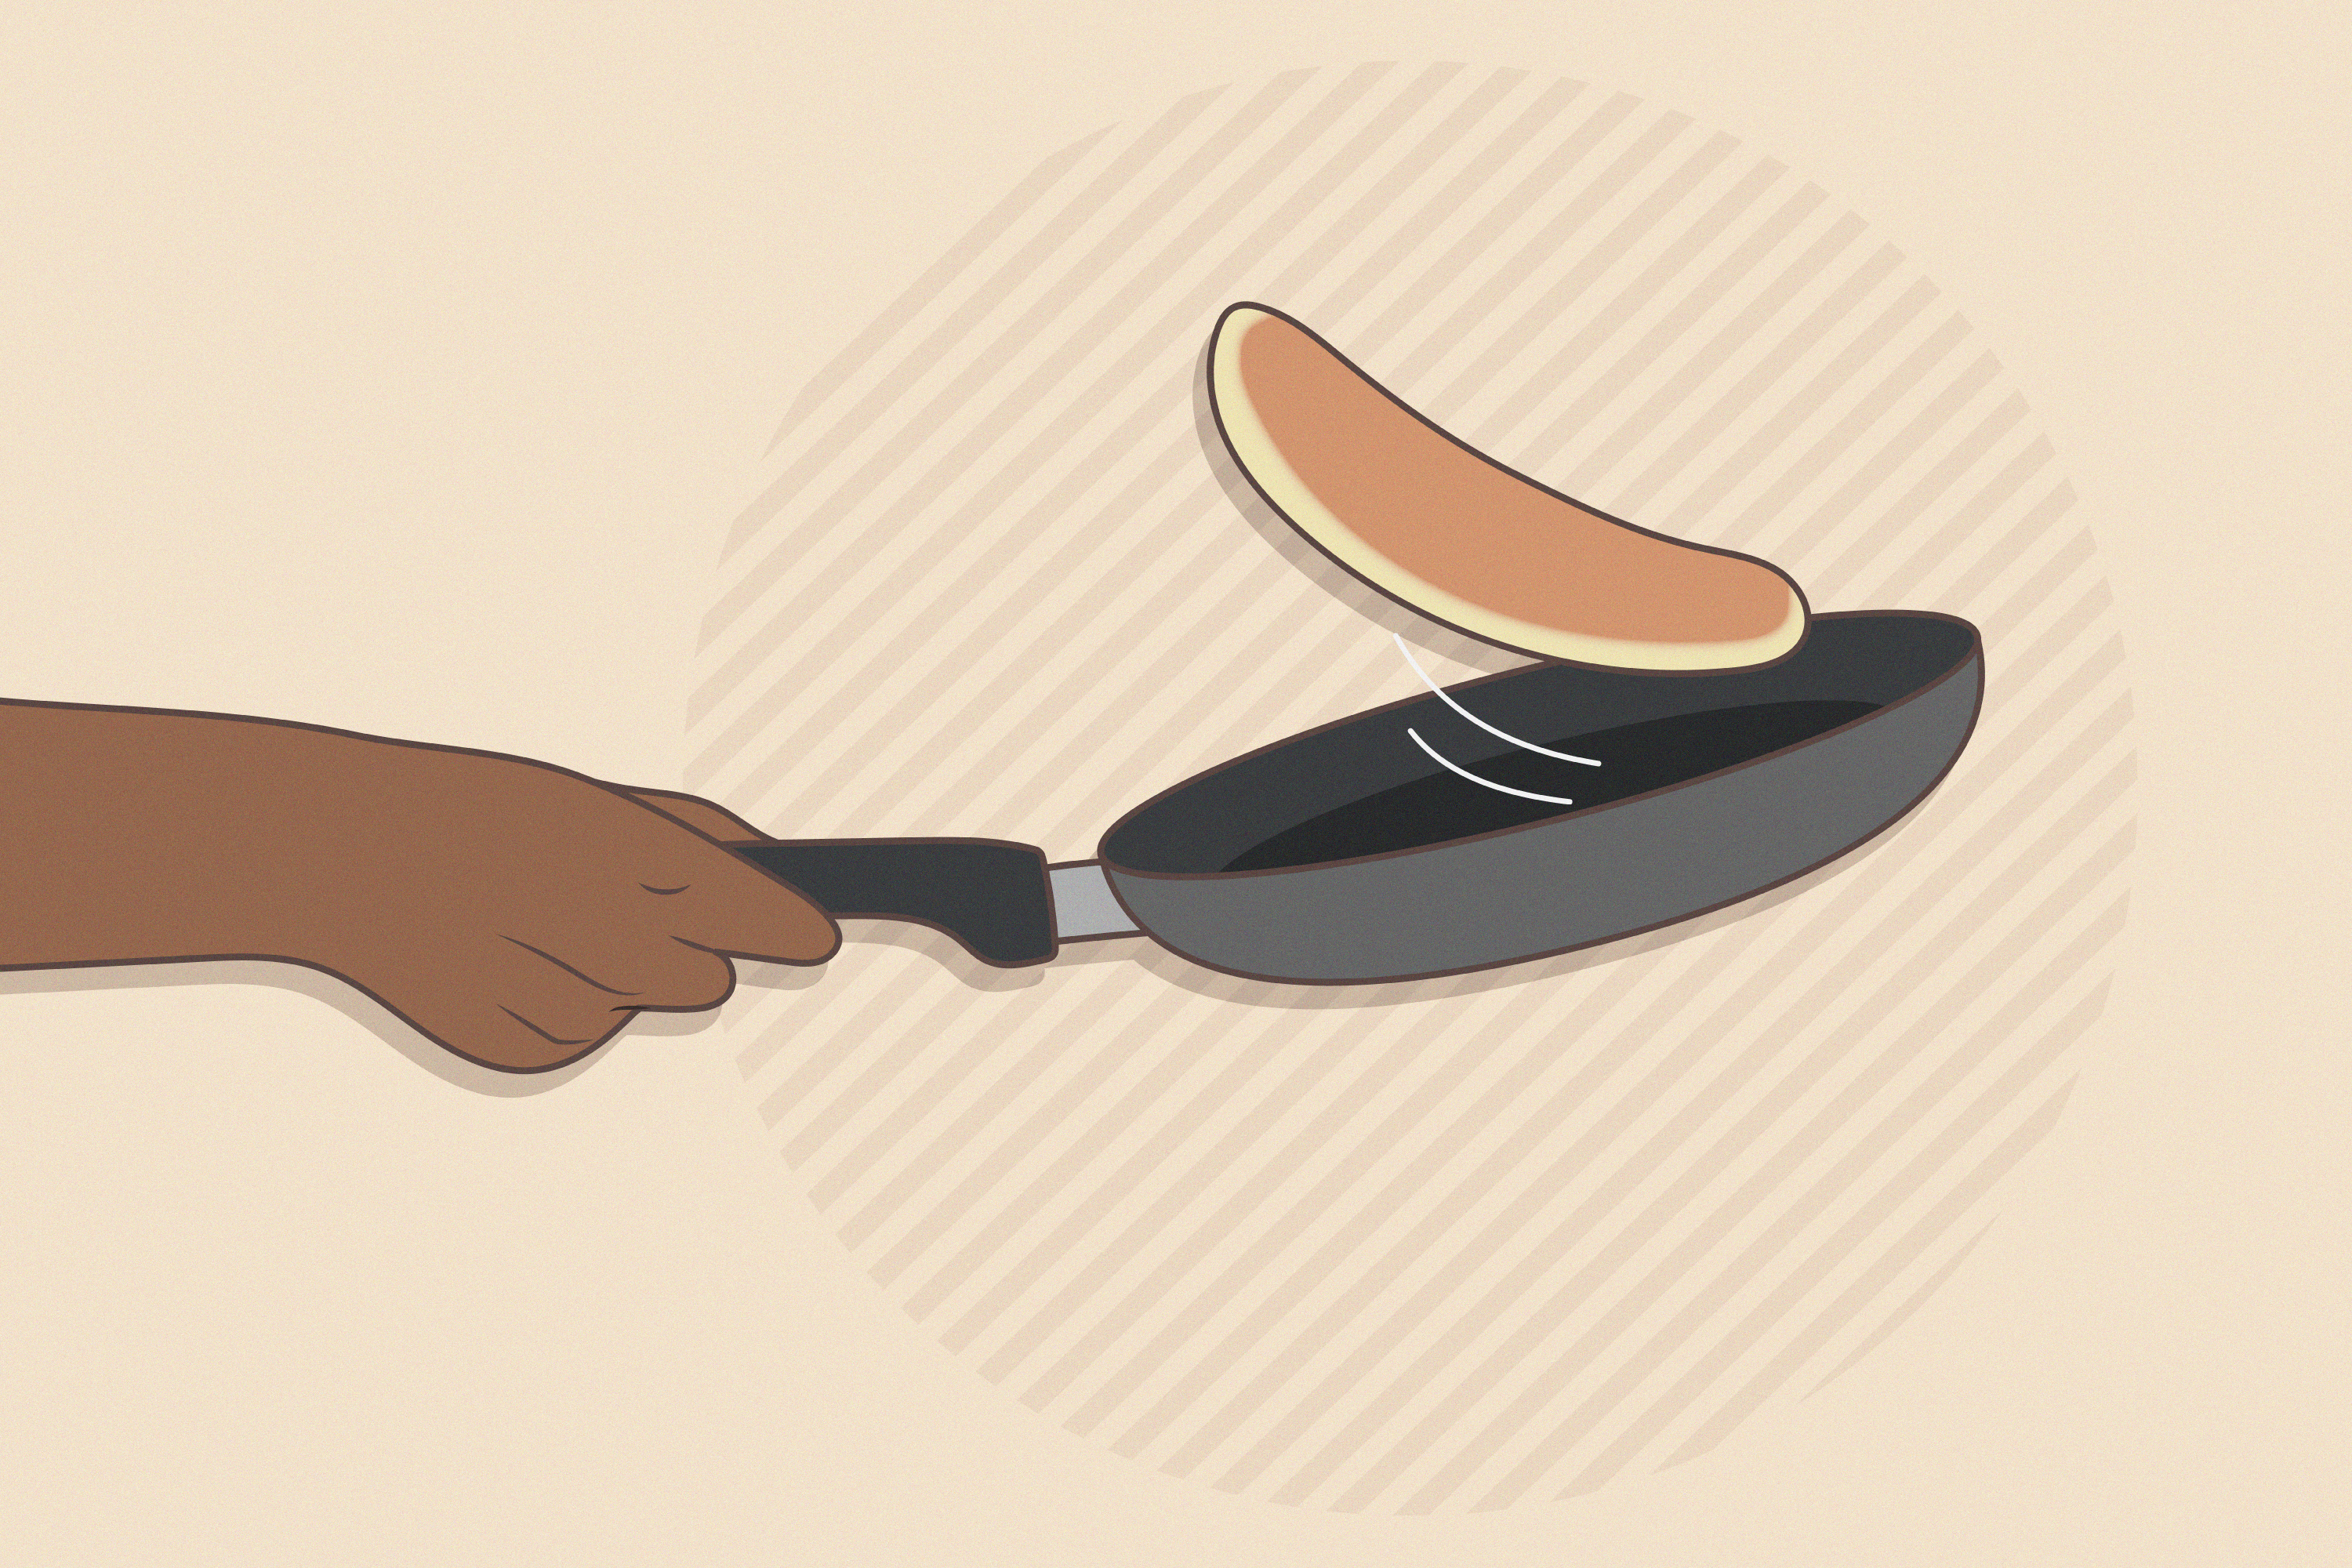 Non-Stick Pans: Could They Be Toxic To You?, Talking Point